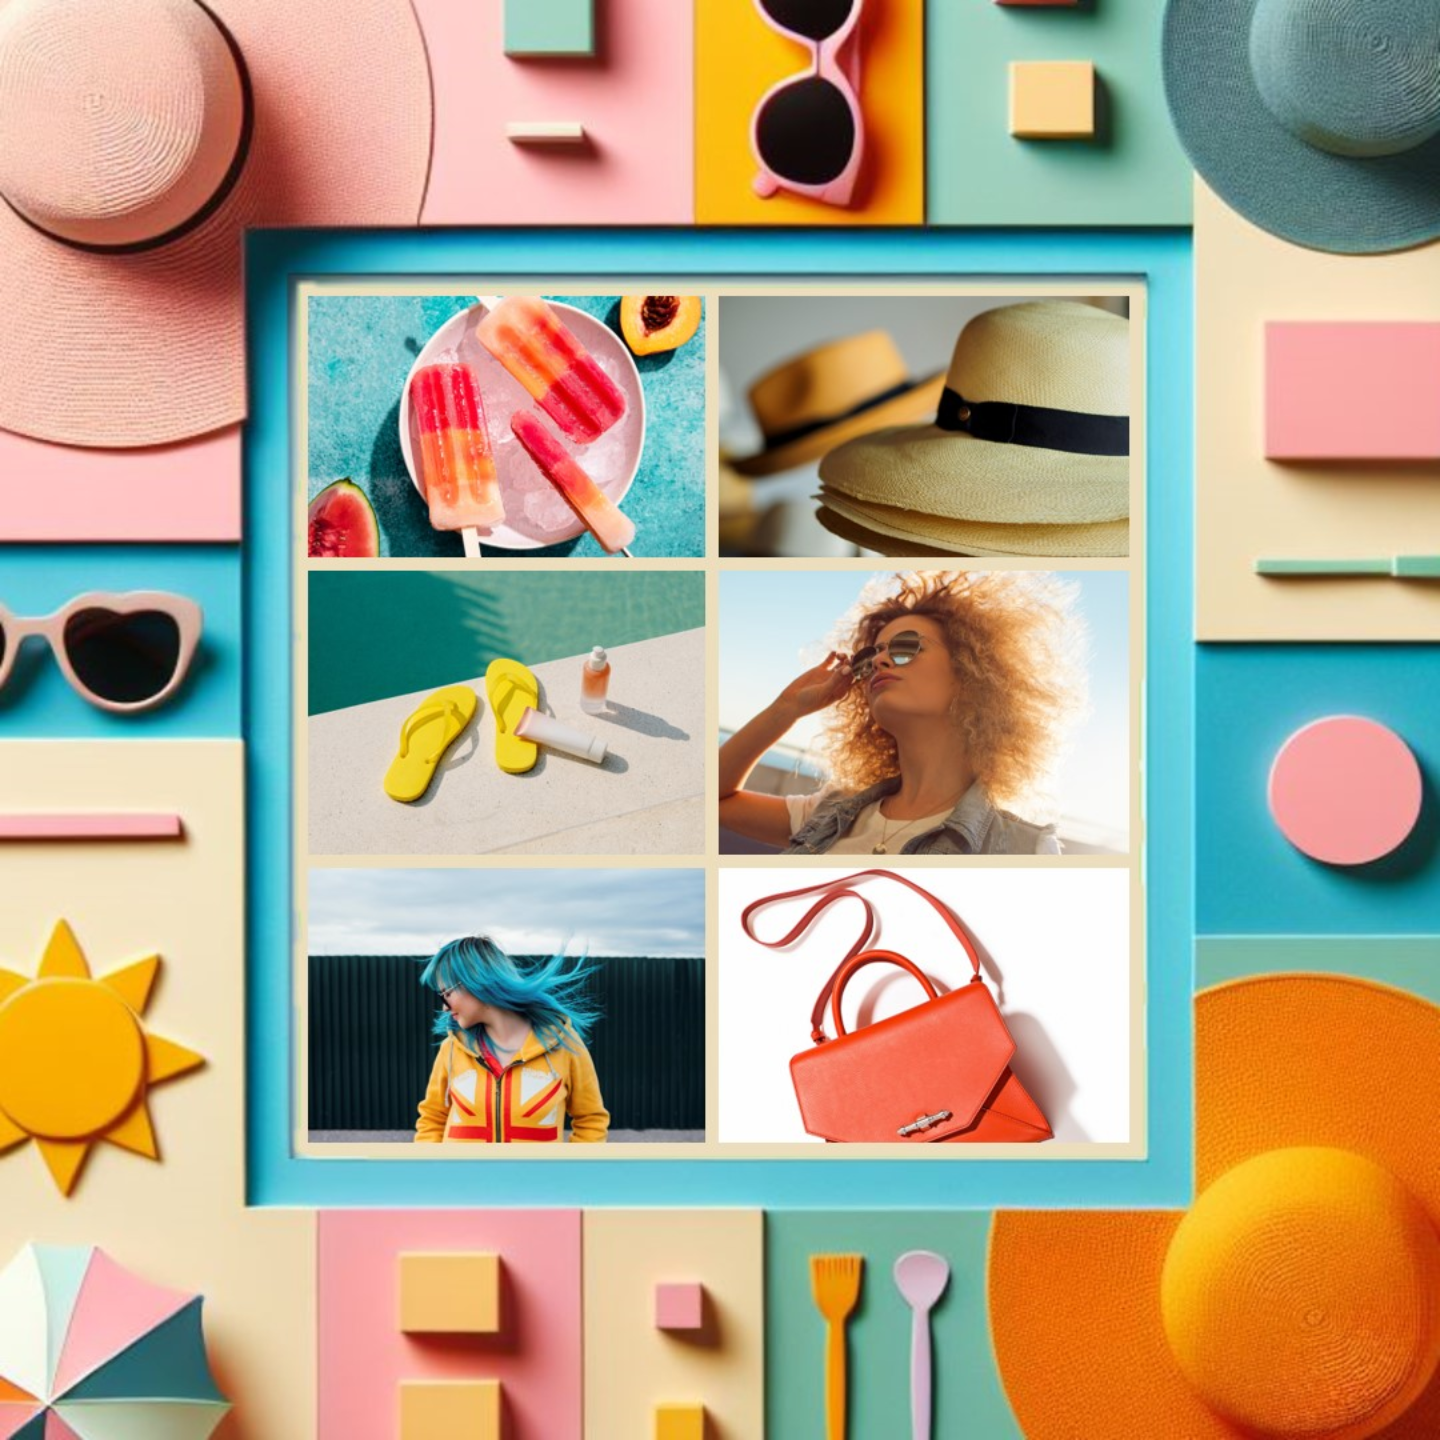 Fashion-inspired collage and frame